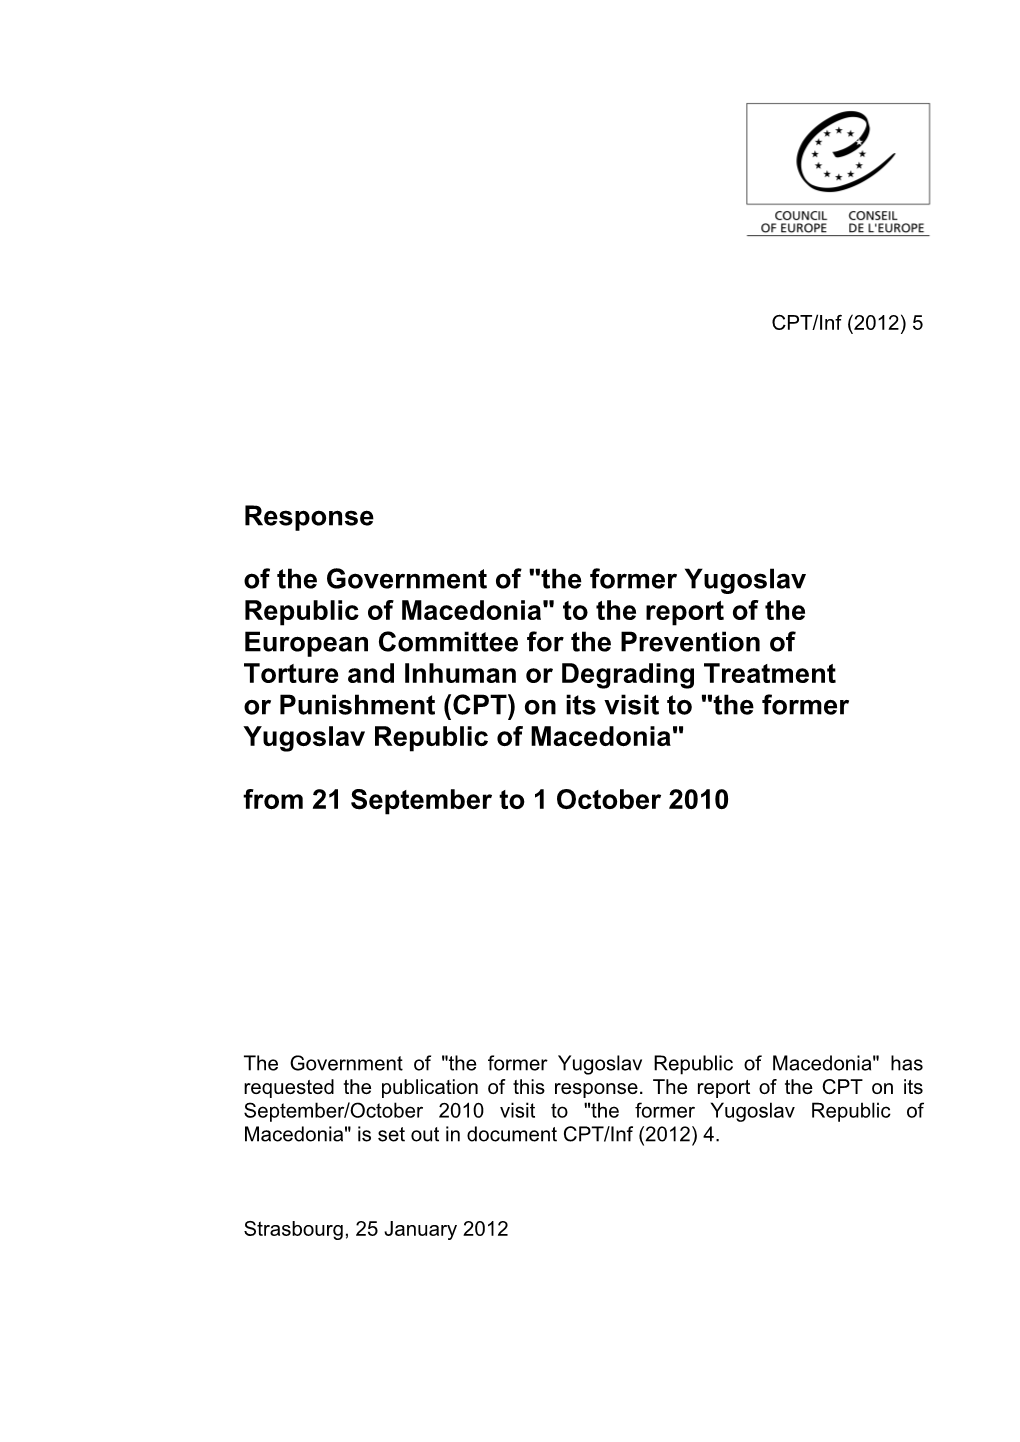 Response of the Government of "The Former Yugoslav Republic Of